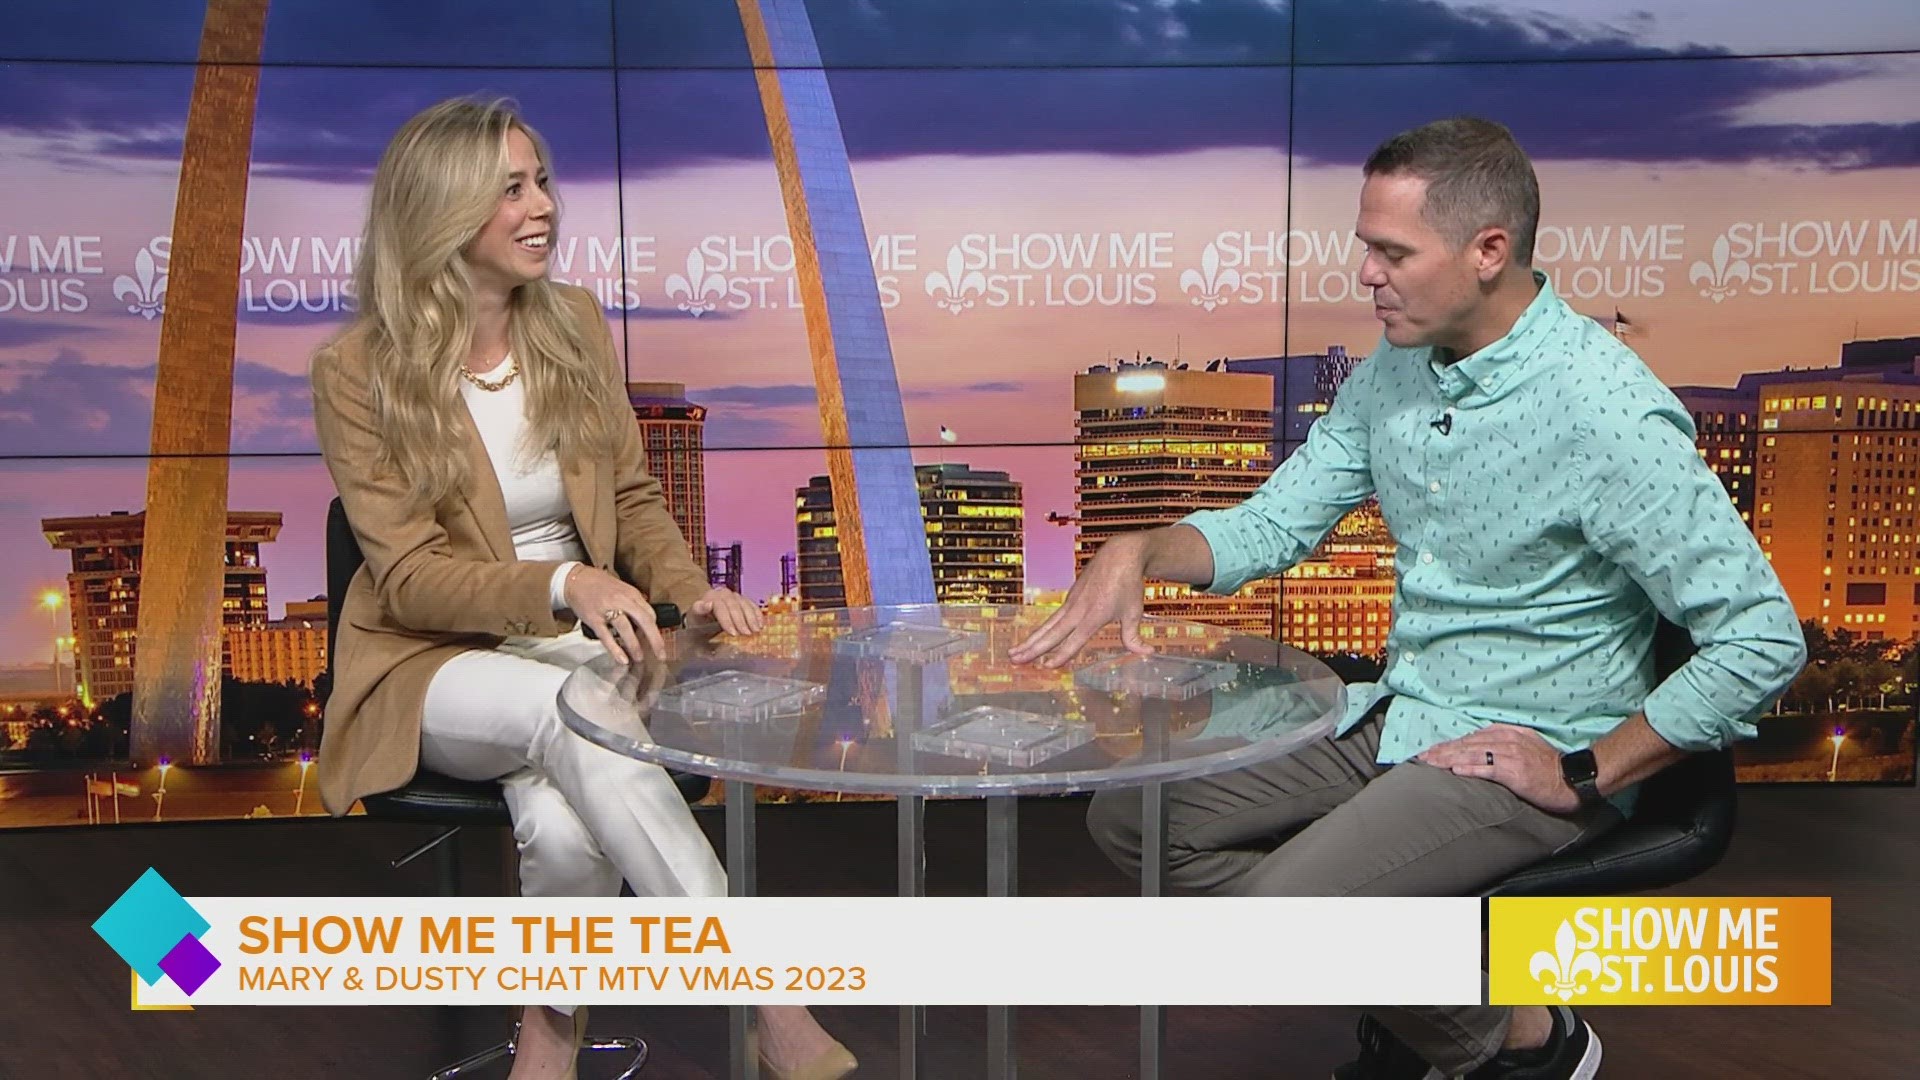 Show Me the Tea! This morning, the dynamic duo chat about Swift's recent awards, plus NSYNC's reunion.